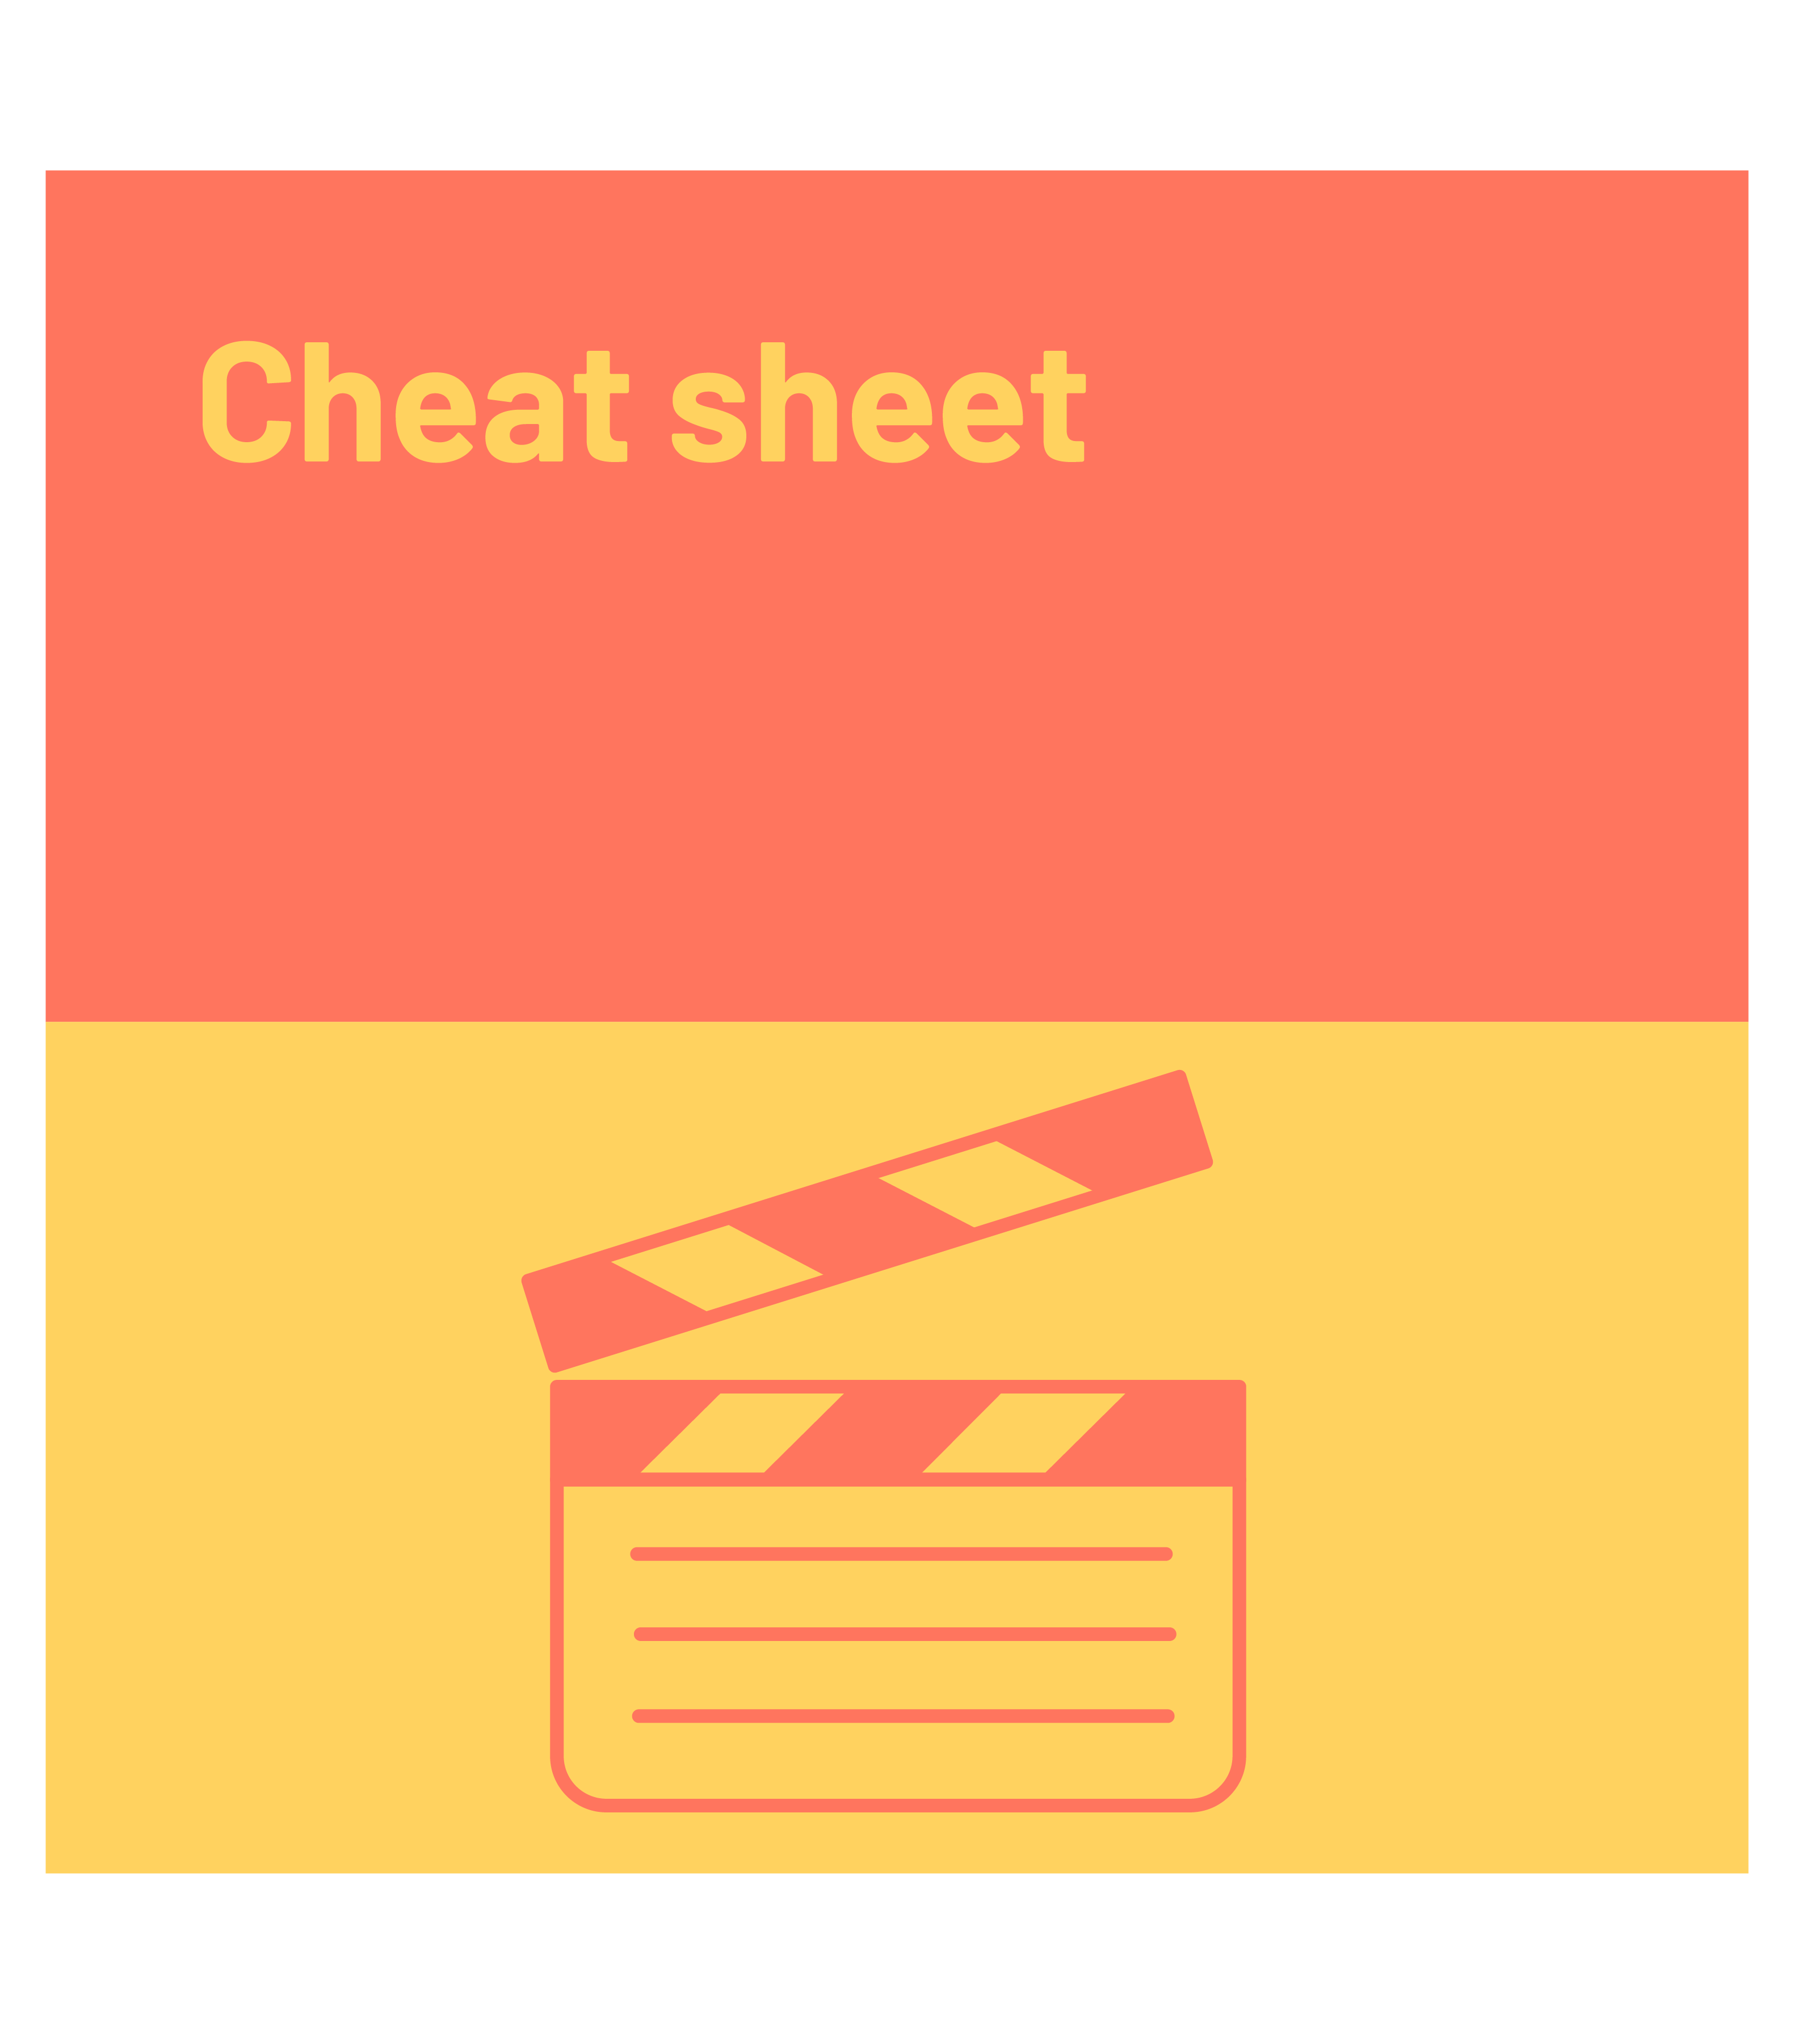 Cheat Sheet, illustration of a clapperboard